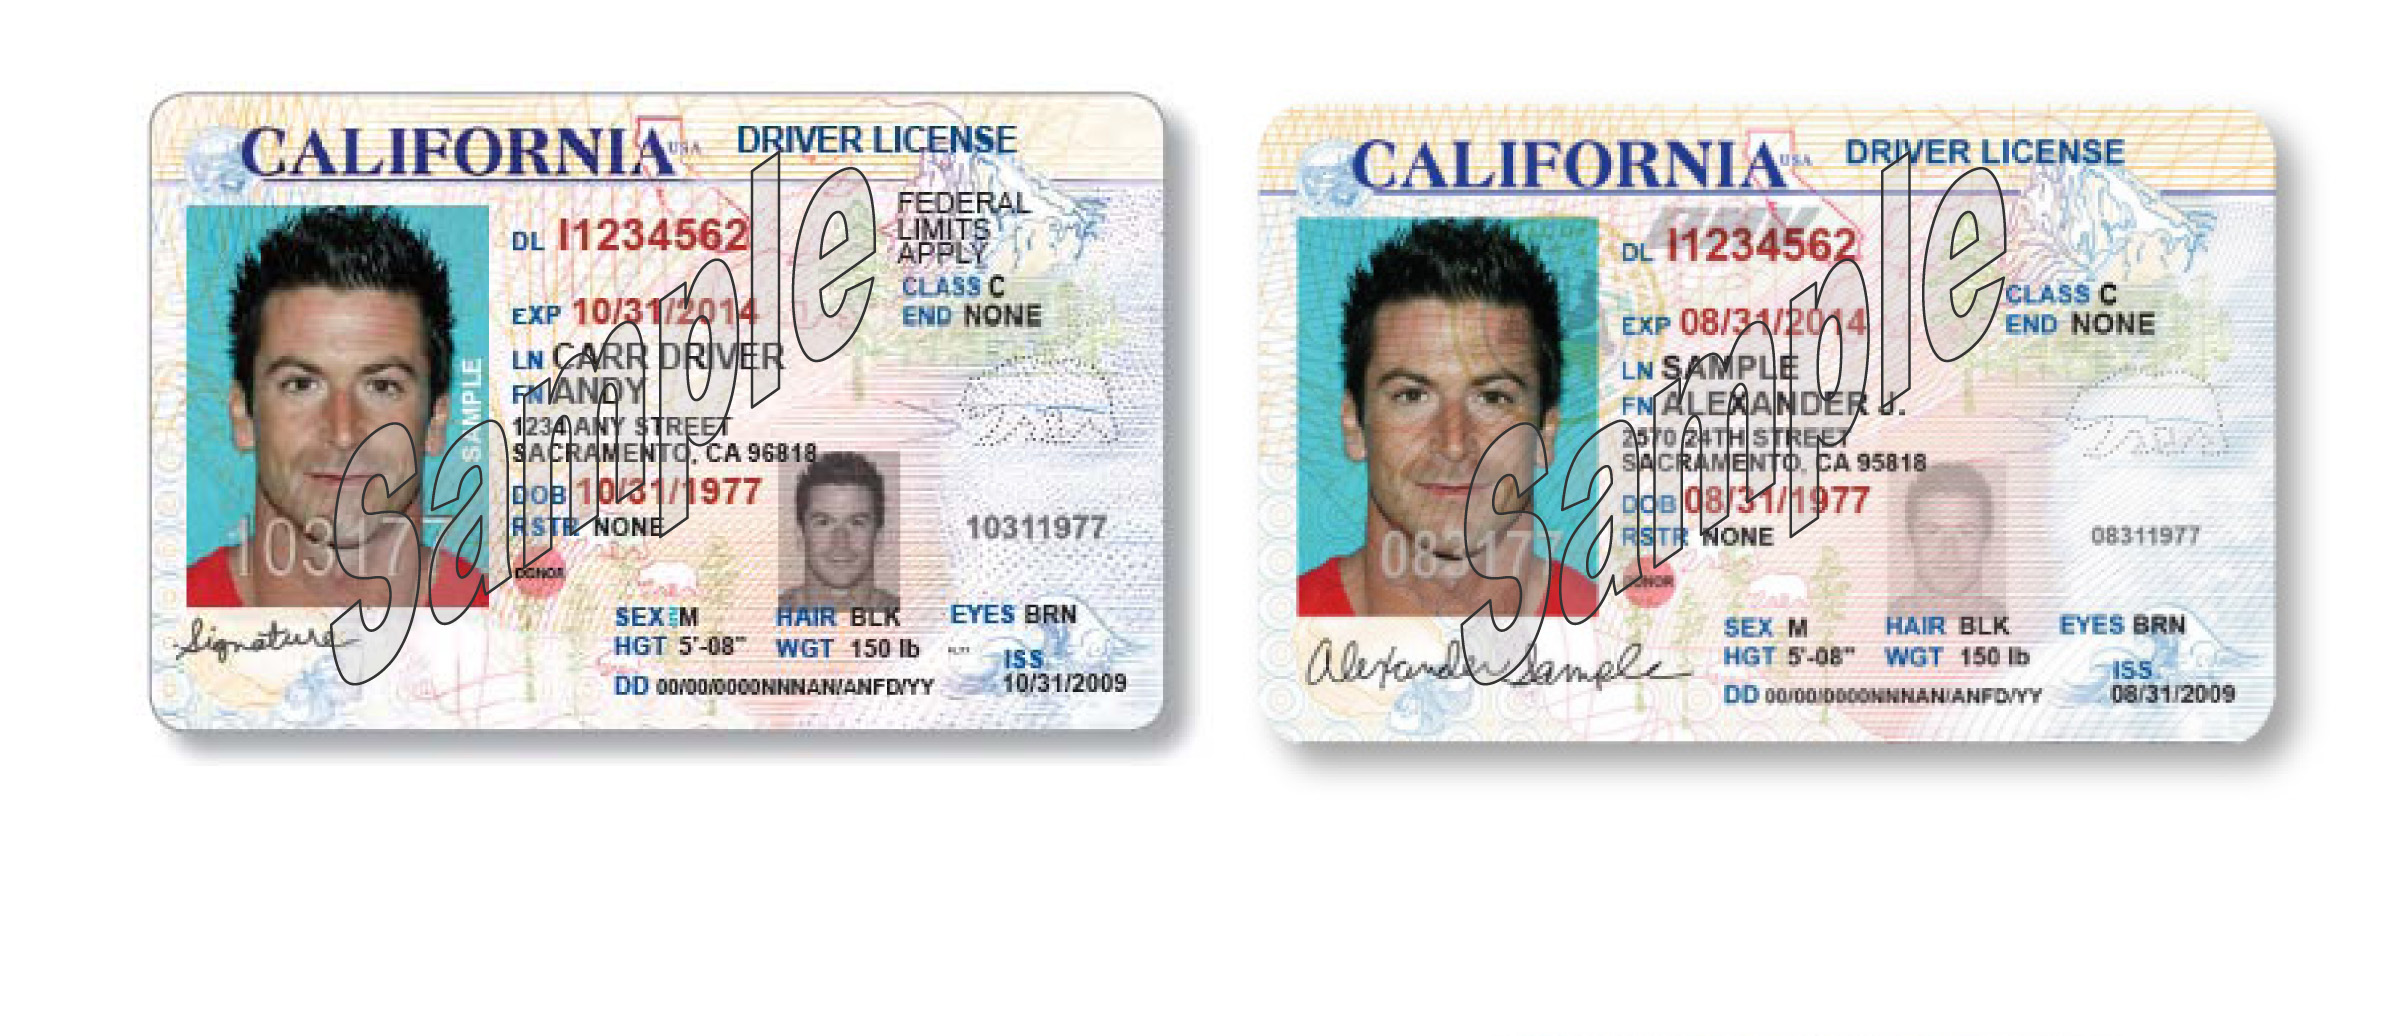 Federal Driver License - Security Guards Companies